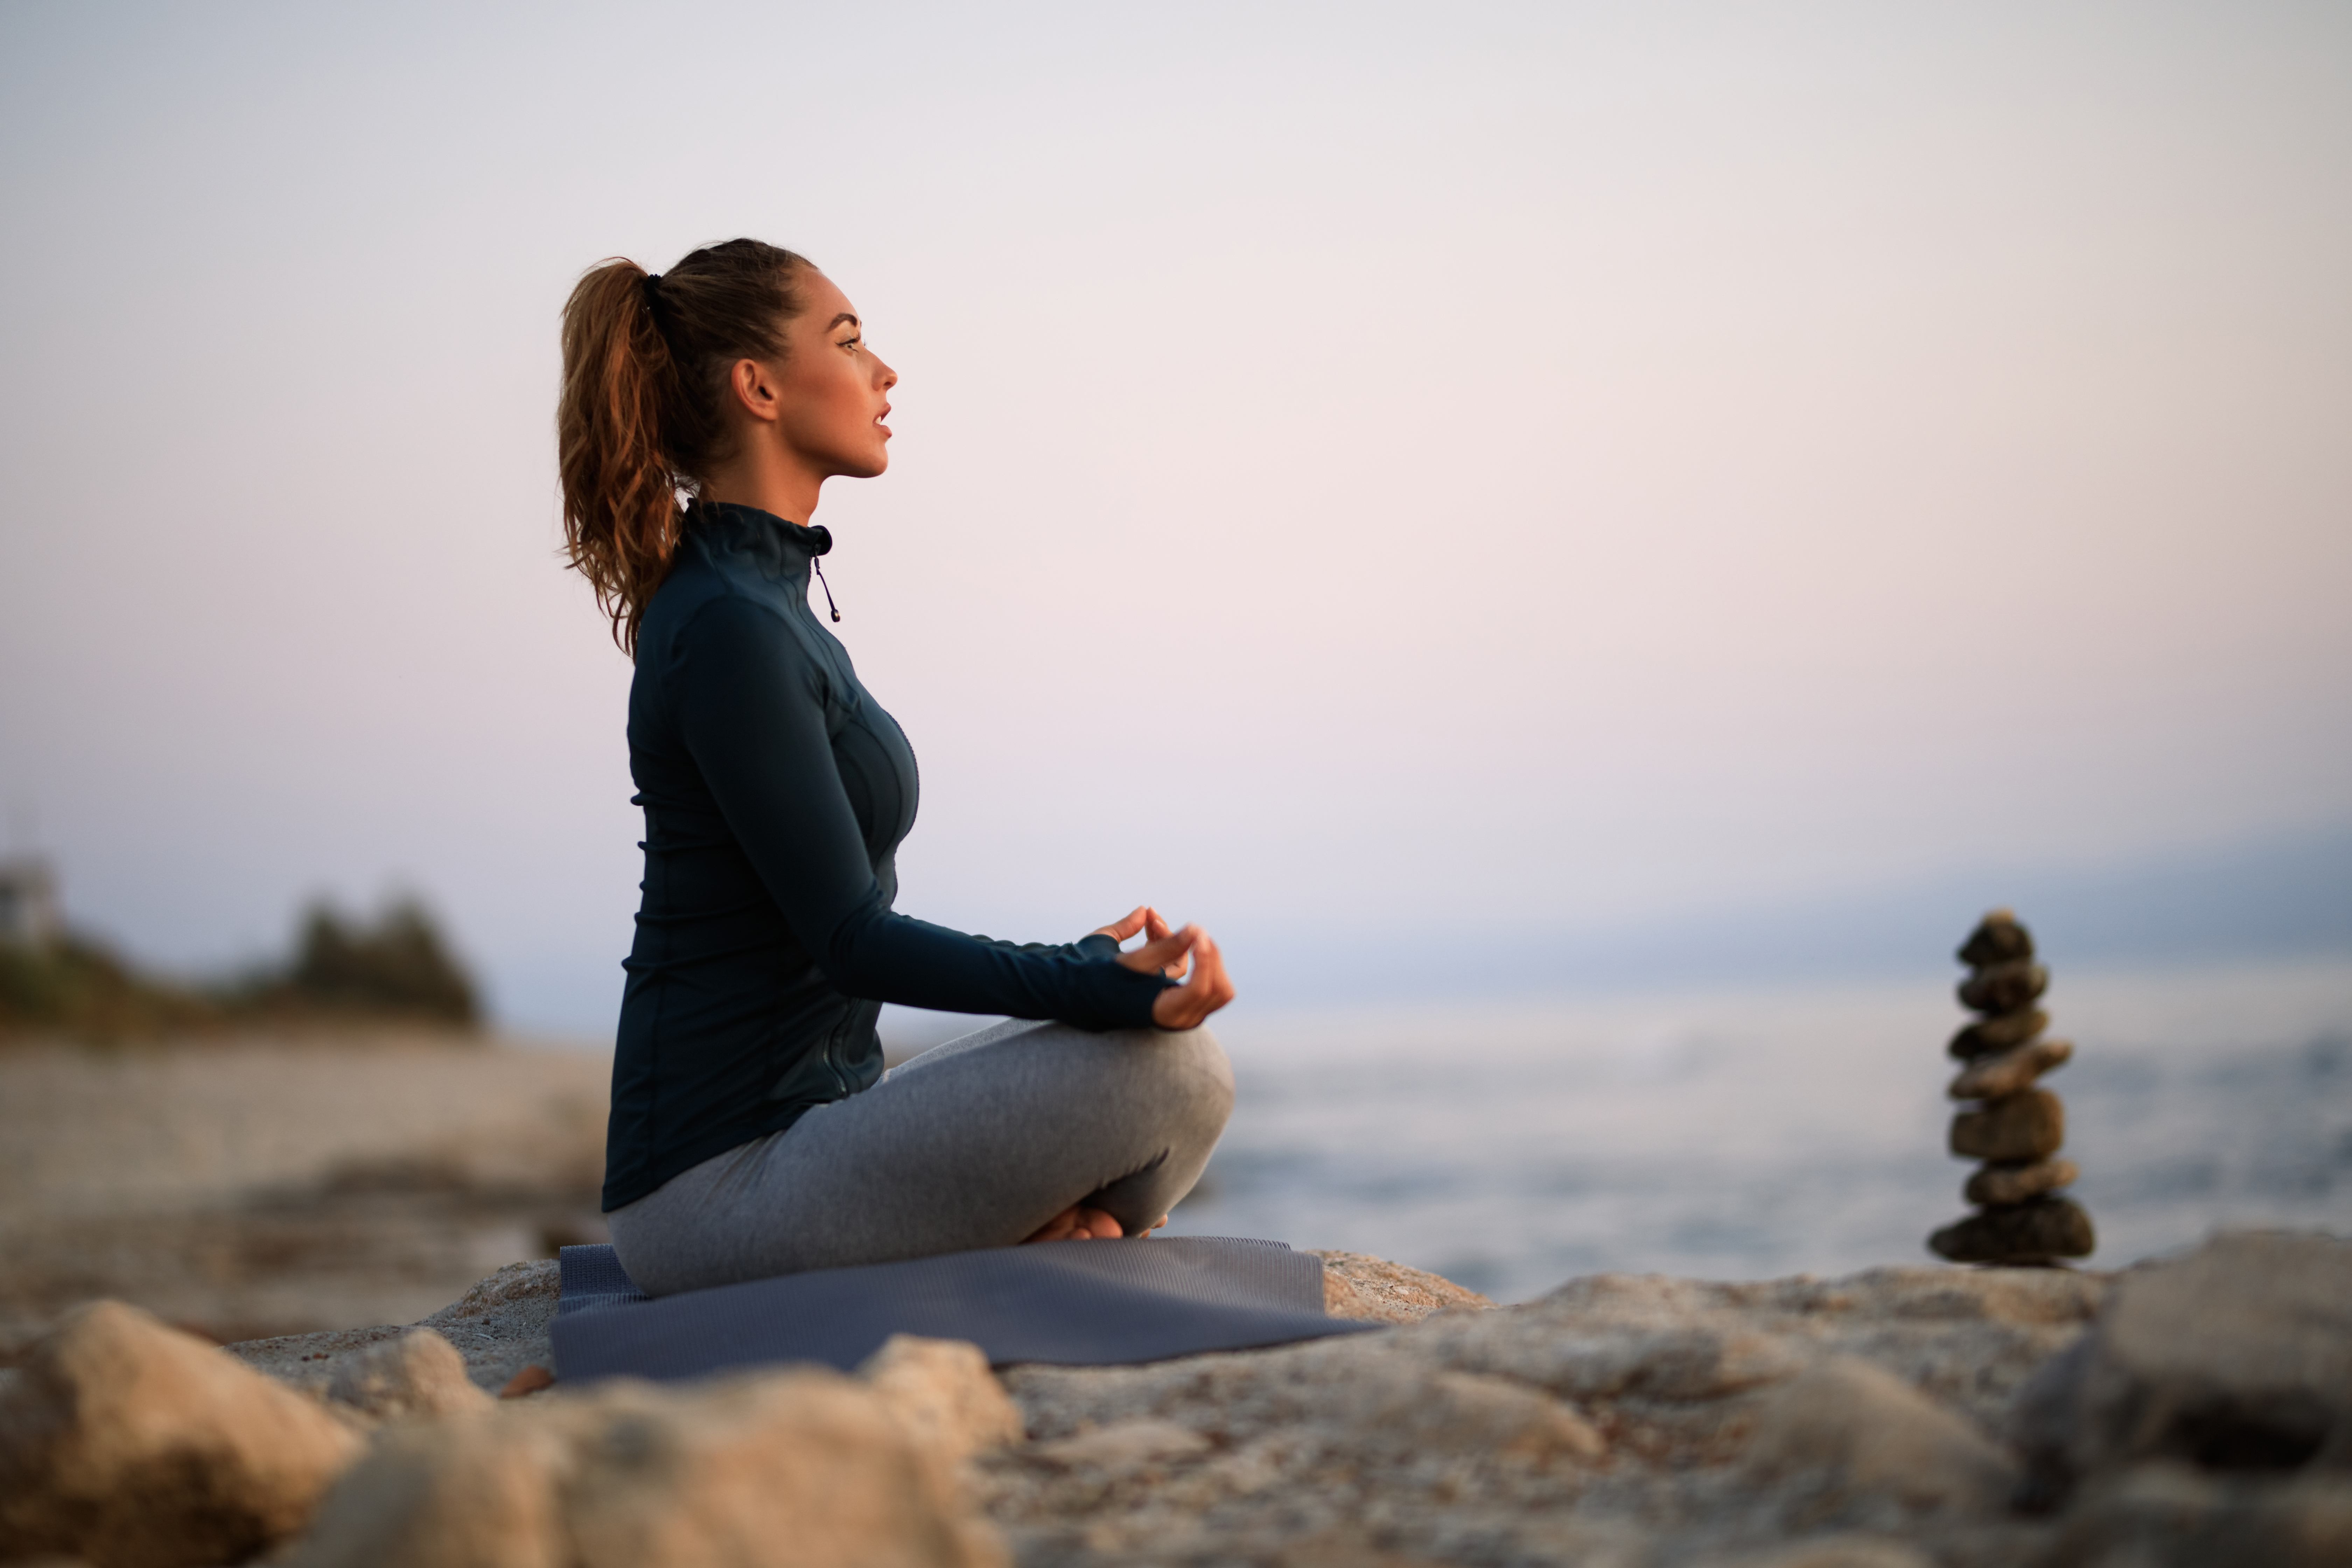 7 Mindfulness Practices to Try in 2023